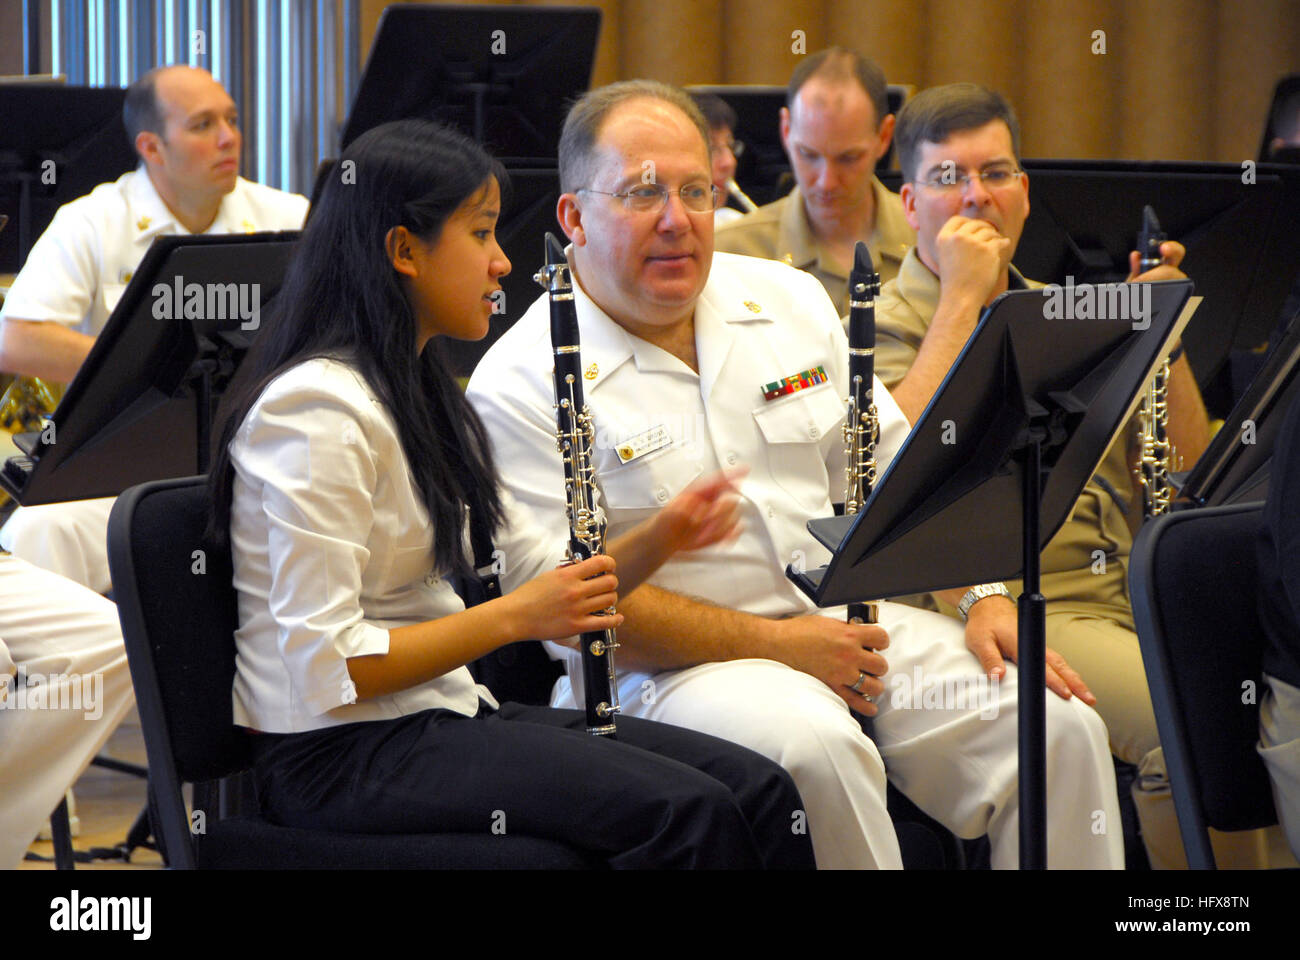 090506-N-0773H-023 WASHINGTON, D.C. (May 6, 2009) Clarinet instrumentalist Rebekah Carpio, the winner of the 9th Annual Navy Band Concerto Competition, discusses changes in the music with fellow clarinet instrumentalist, Chief Musician Russell V. Gross, during a Navy Band afternoon rehearsal in the Sail Loft at Washington Navy Yard. The rehearsal was in preparation for the 9th Annual Navy Band High School Concerton Competition Concert at the Chesapeake Arts Center in Brooklyn Hights, Md. The Concerto Competition highlights the talent of exceptionally gifted student musicians by giving them the Stock Photo